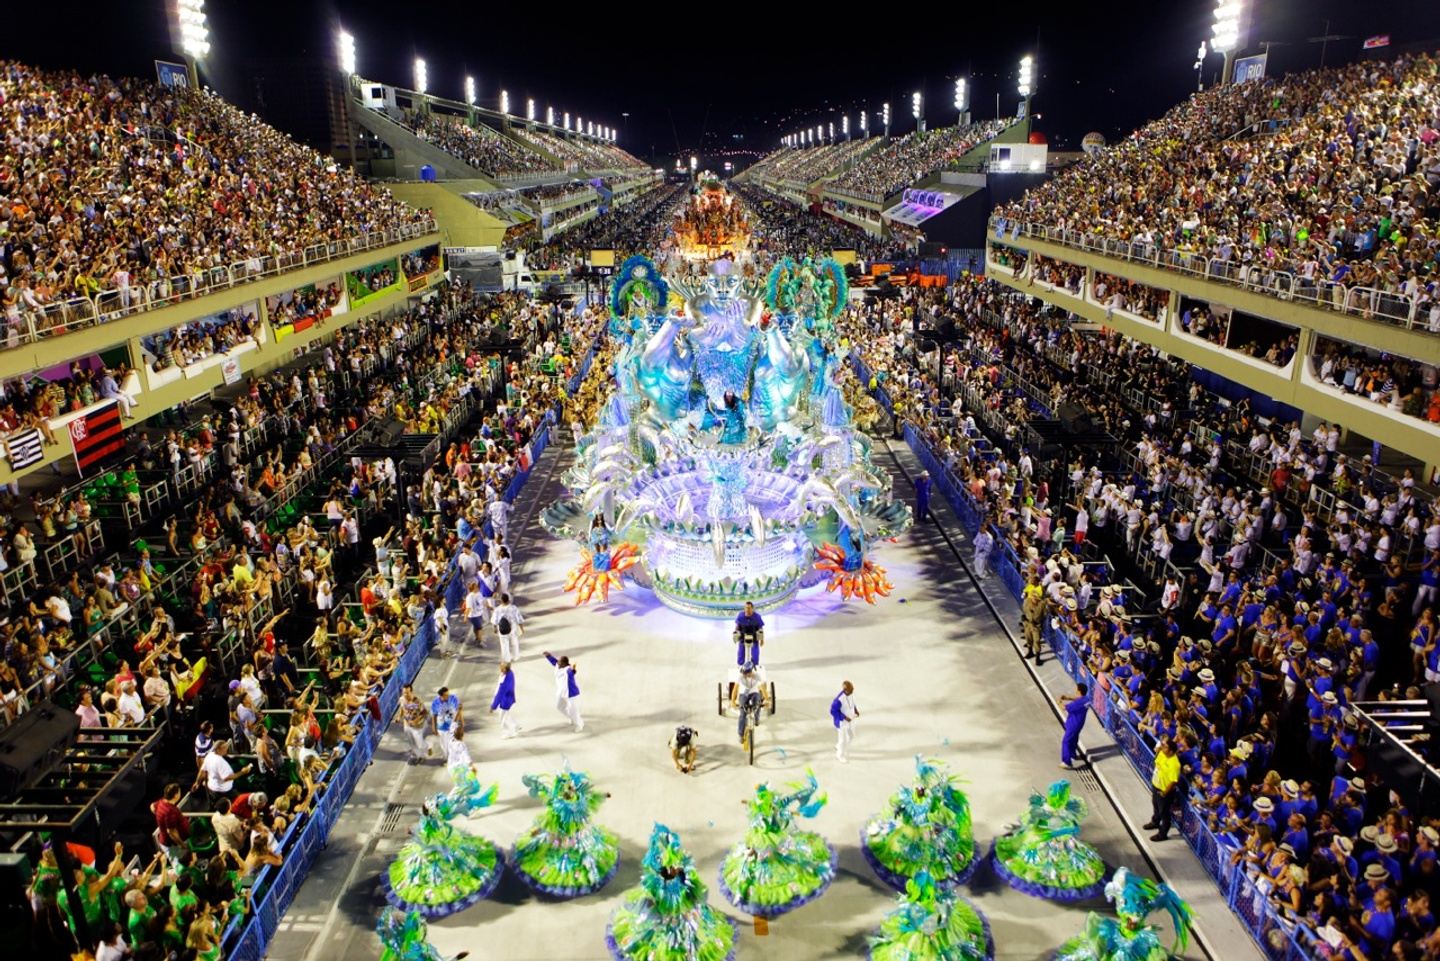 Watch the Carnaval Parade as a Local